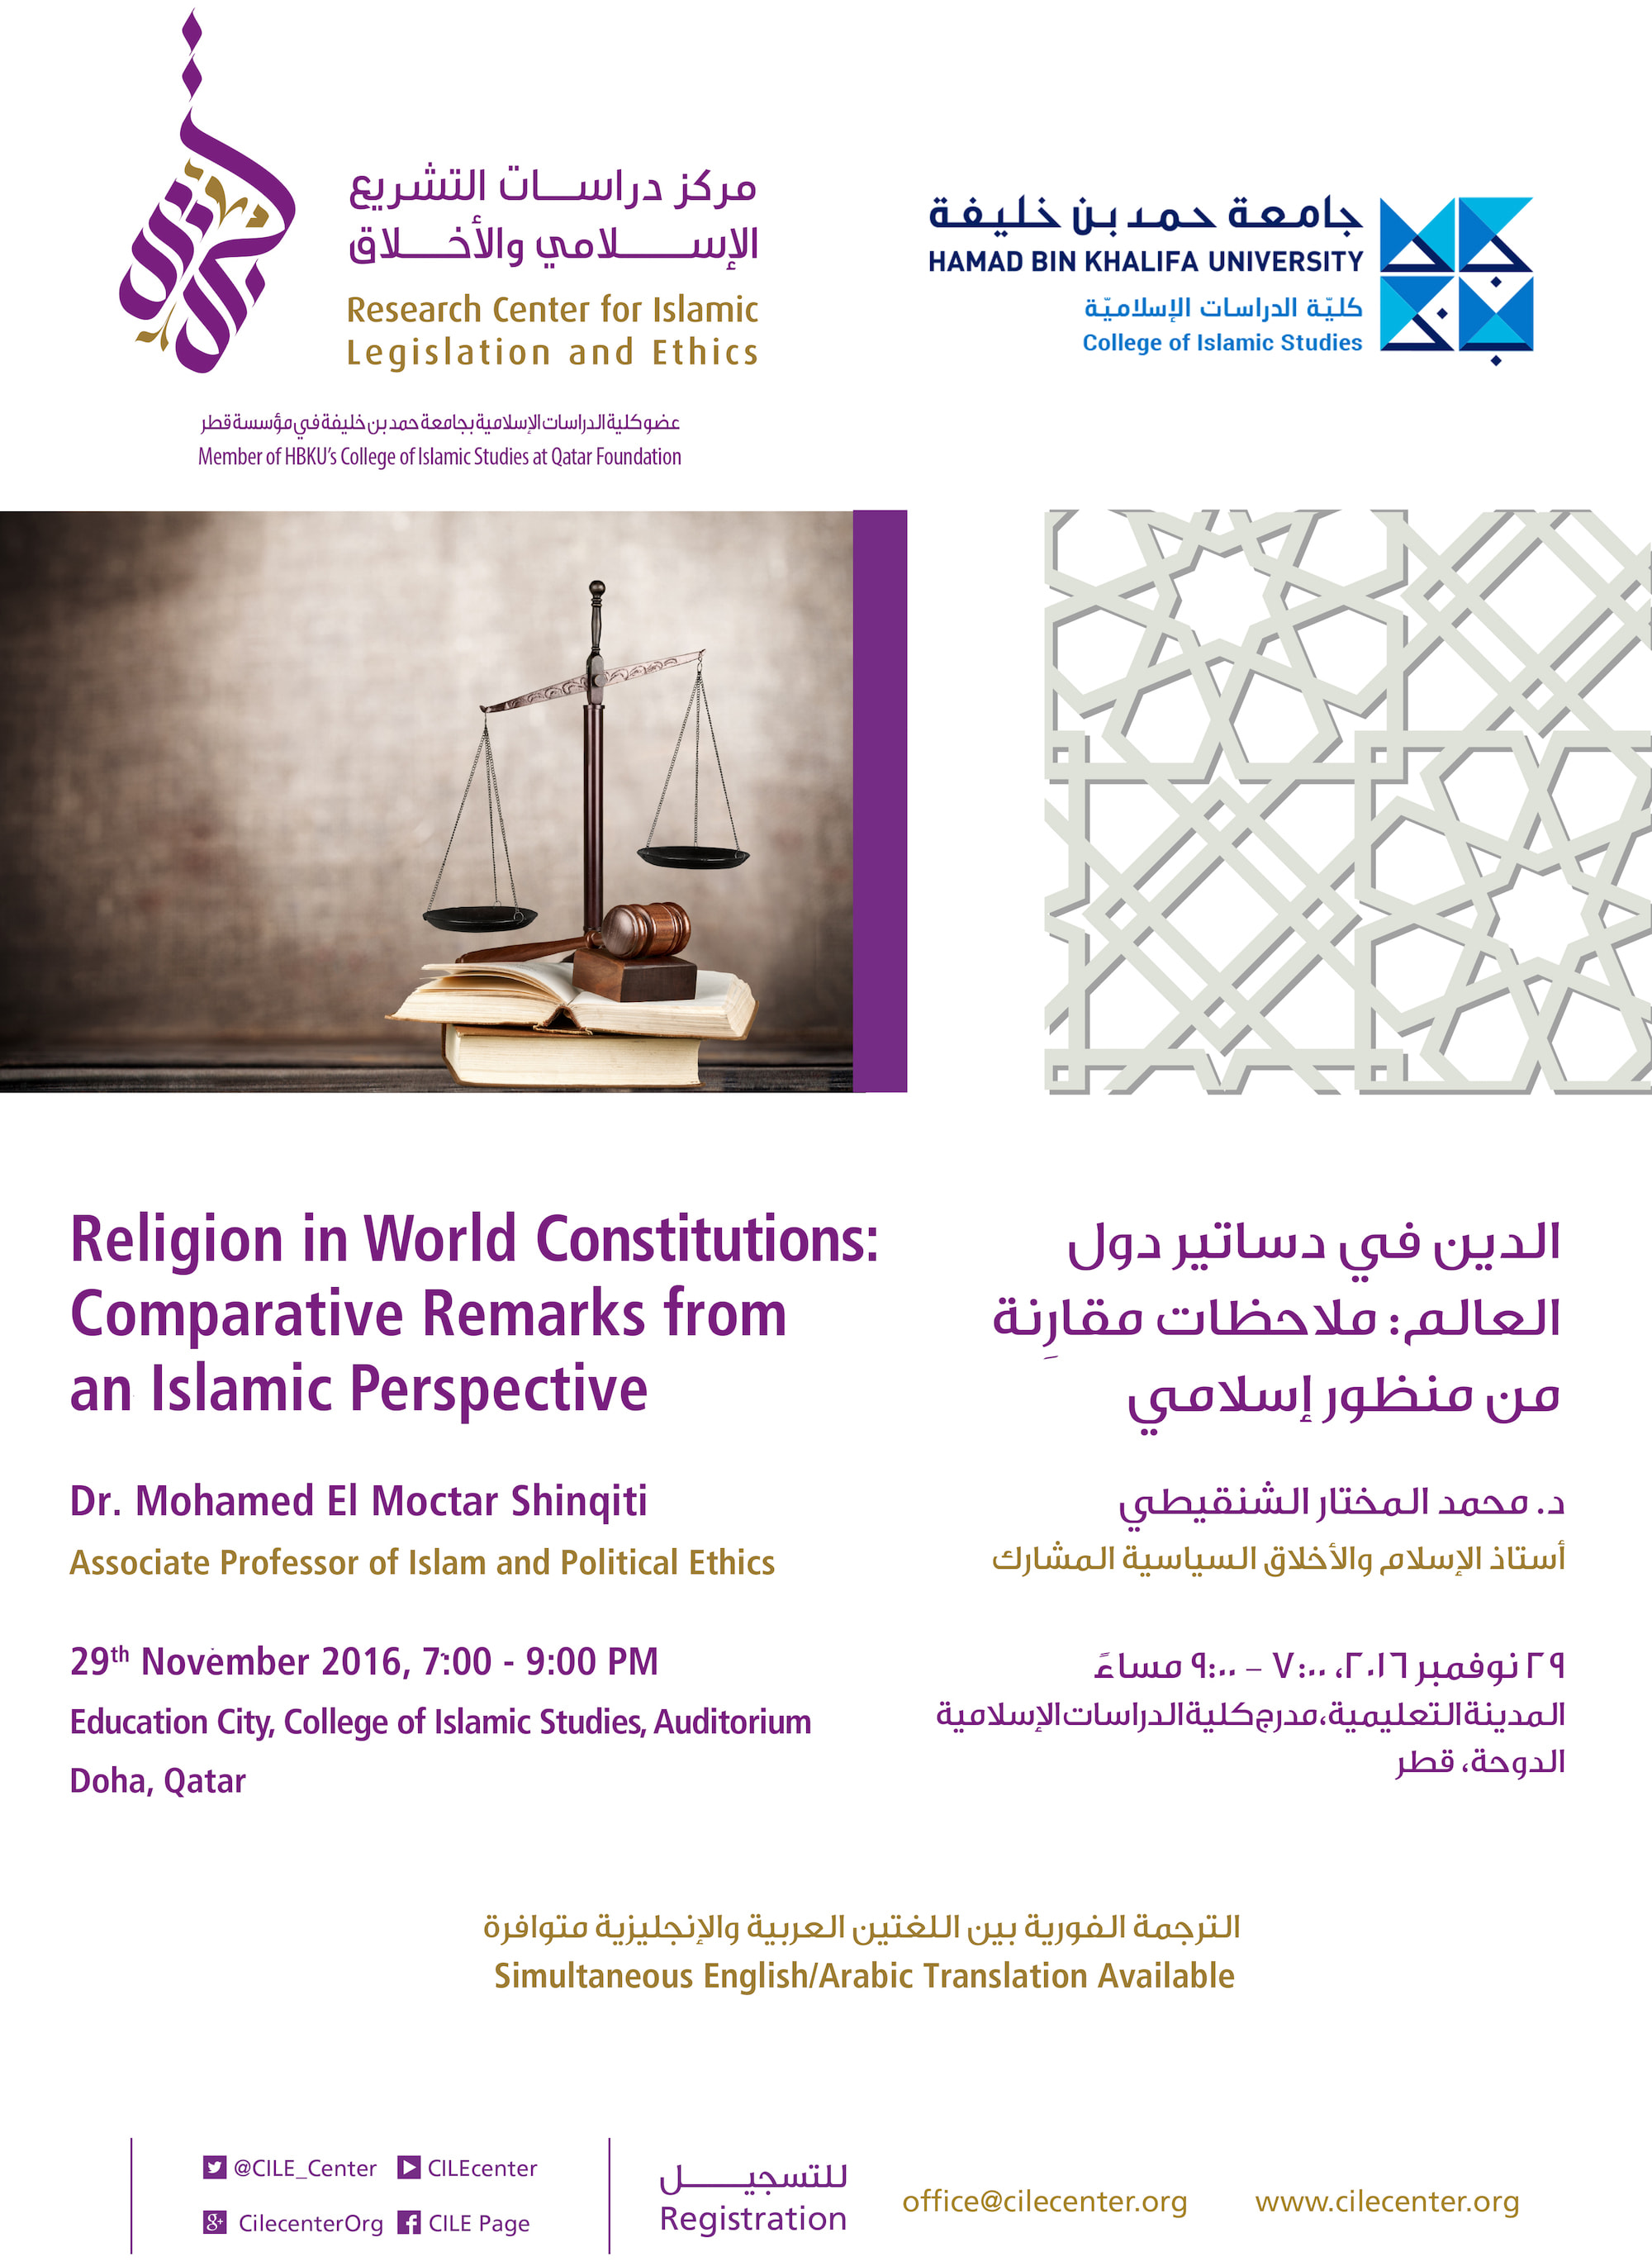 Public lecture: Religion in World Constitutions: Comparative Remarks from an Islamic Perspective